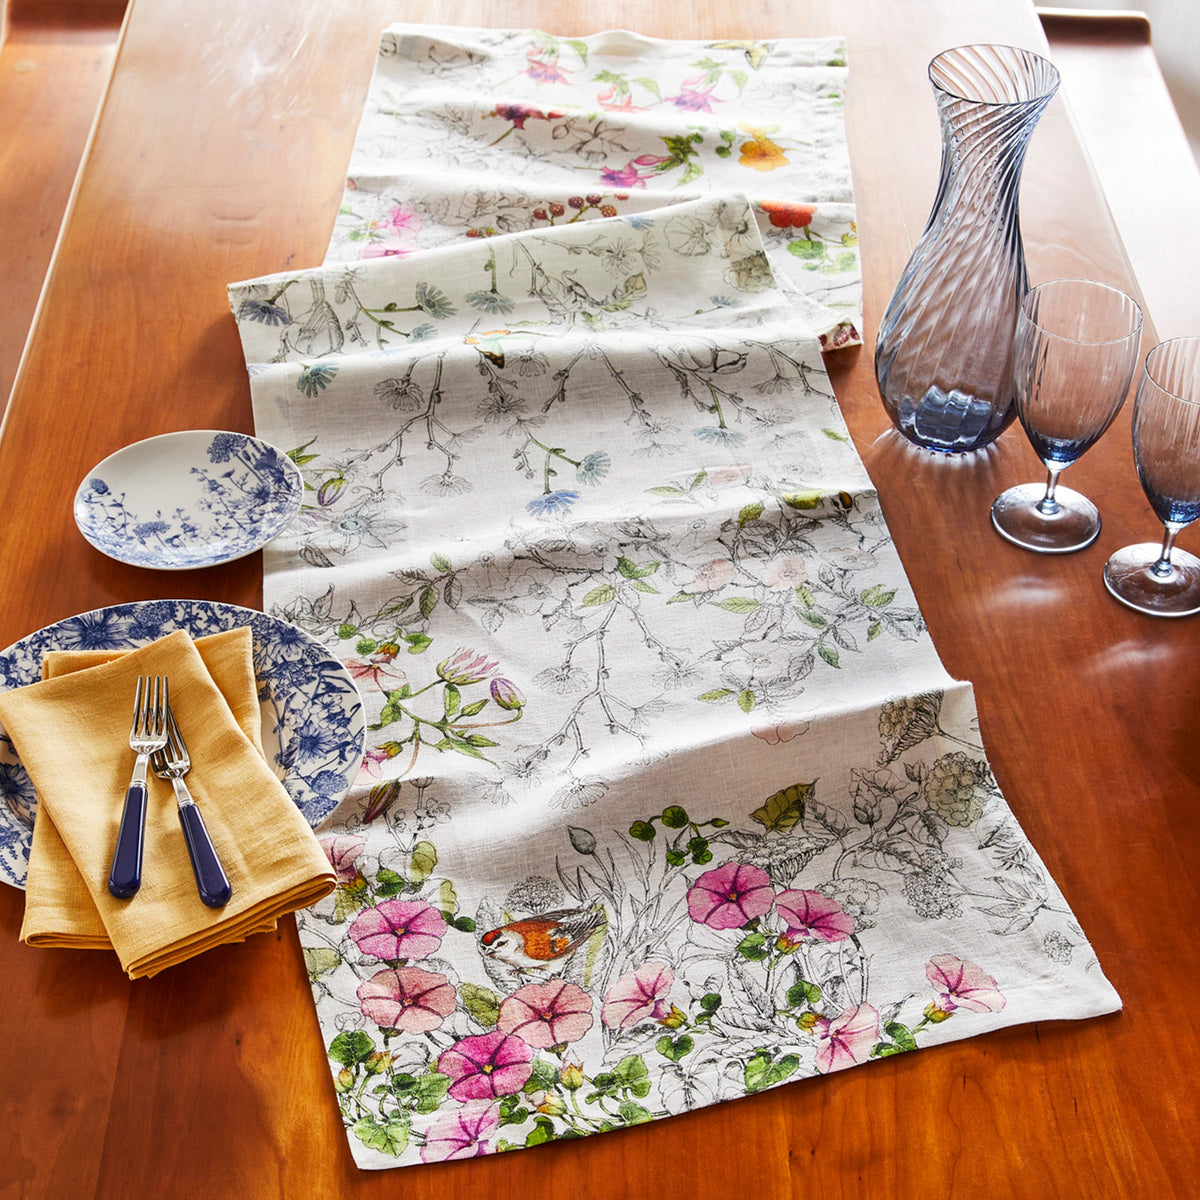 Marigold linen napkins styled with the Nasturtium table runner by Caskata.